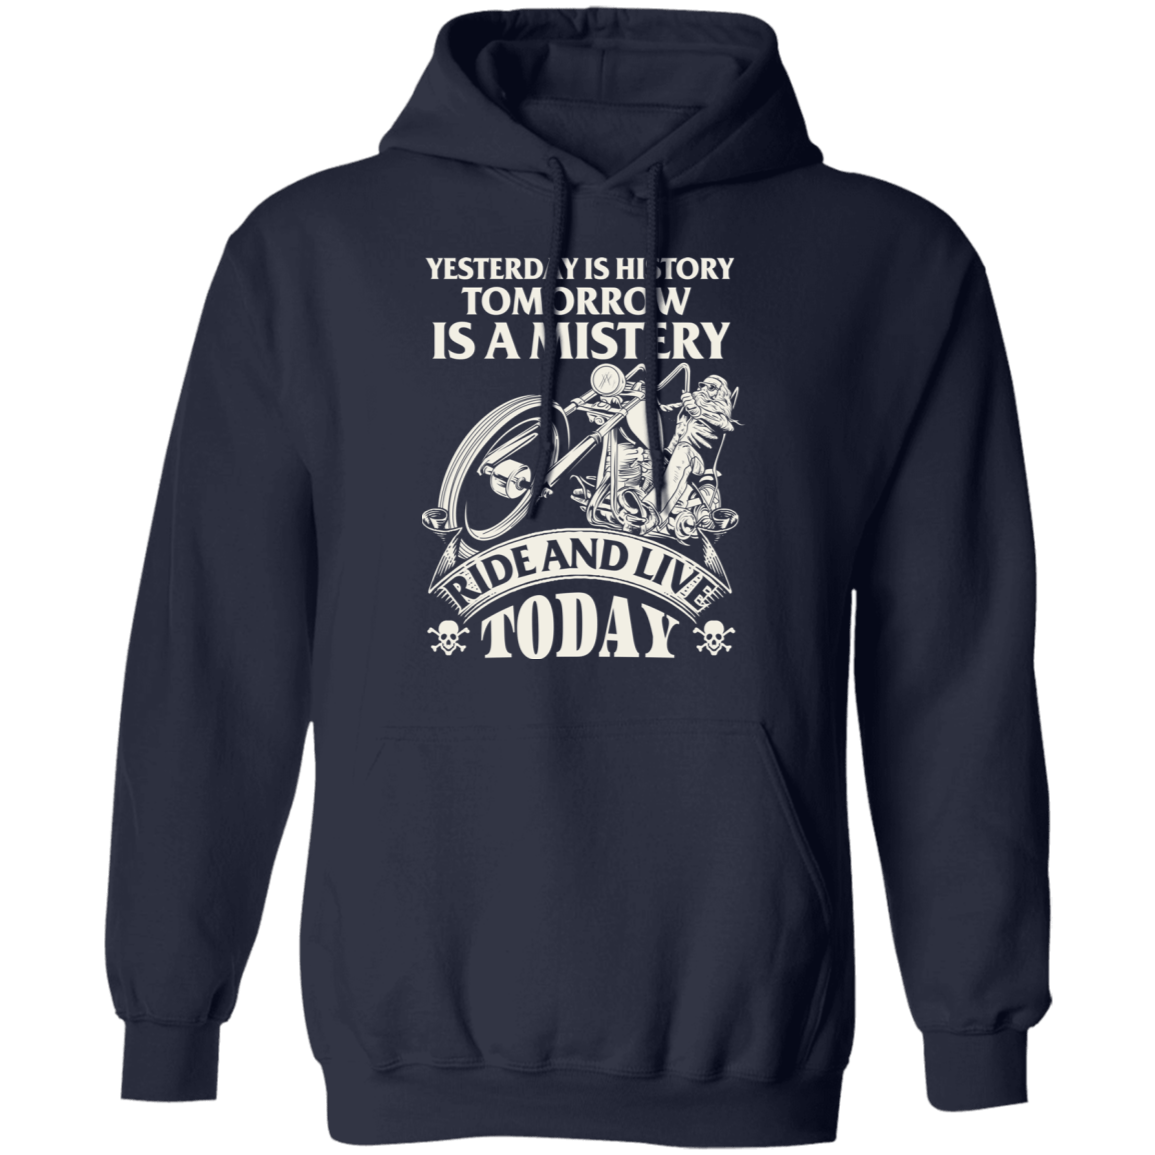 Yesterday is history, tomorrow is a mystery. Ride and live today Biker Shirt